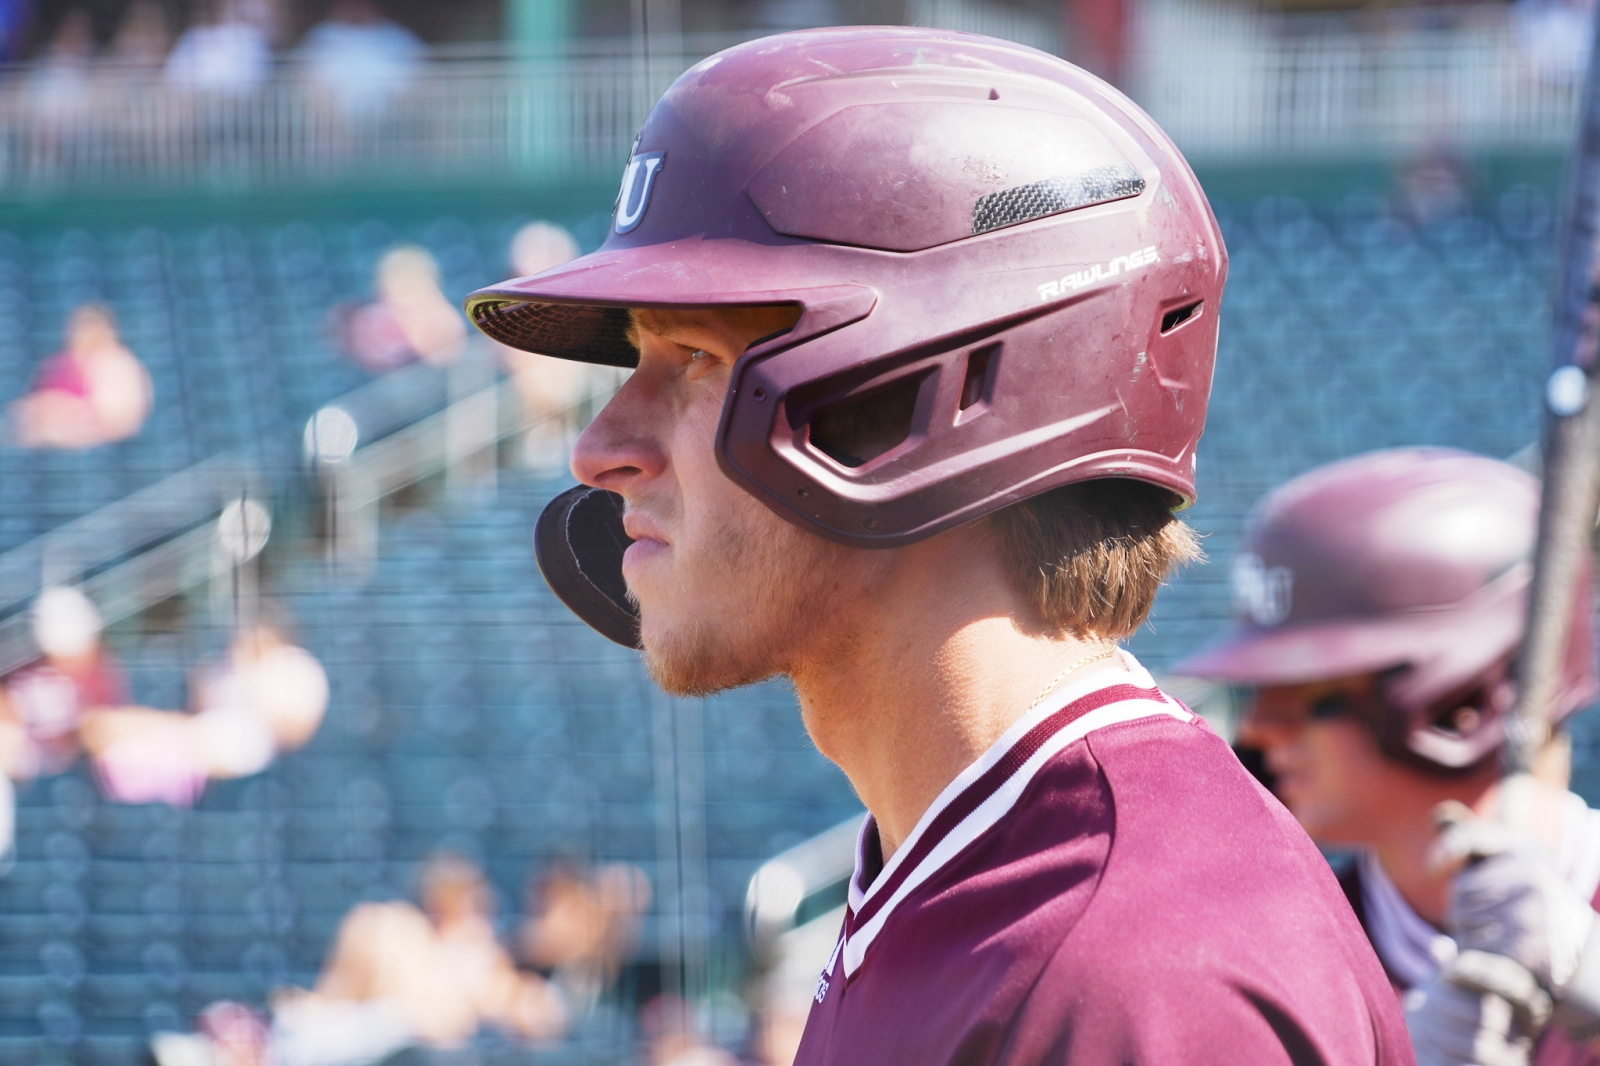 Spencer Nivens, wearing a Missouri State baseball uniform, waits for his turn to bat during a game at Hammons Field.